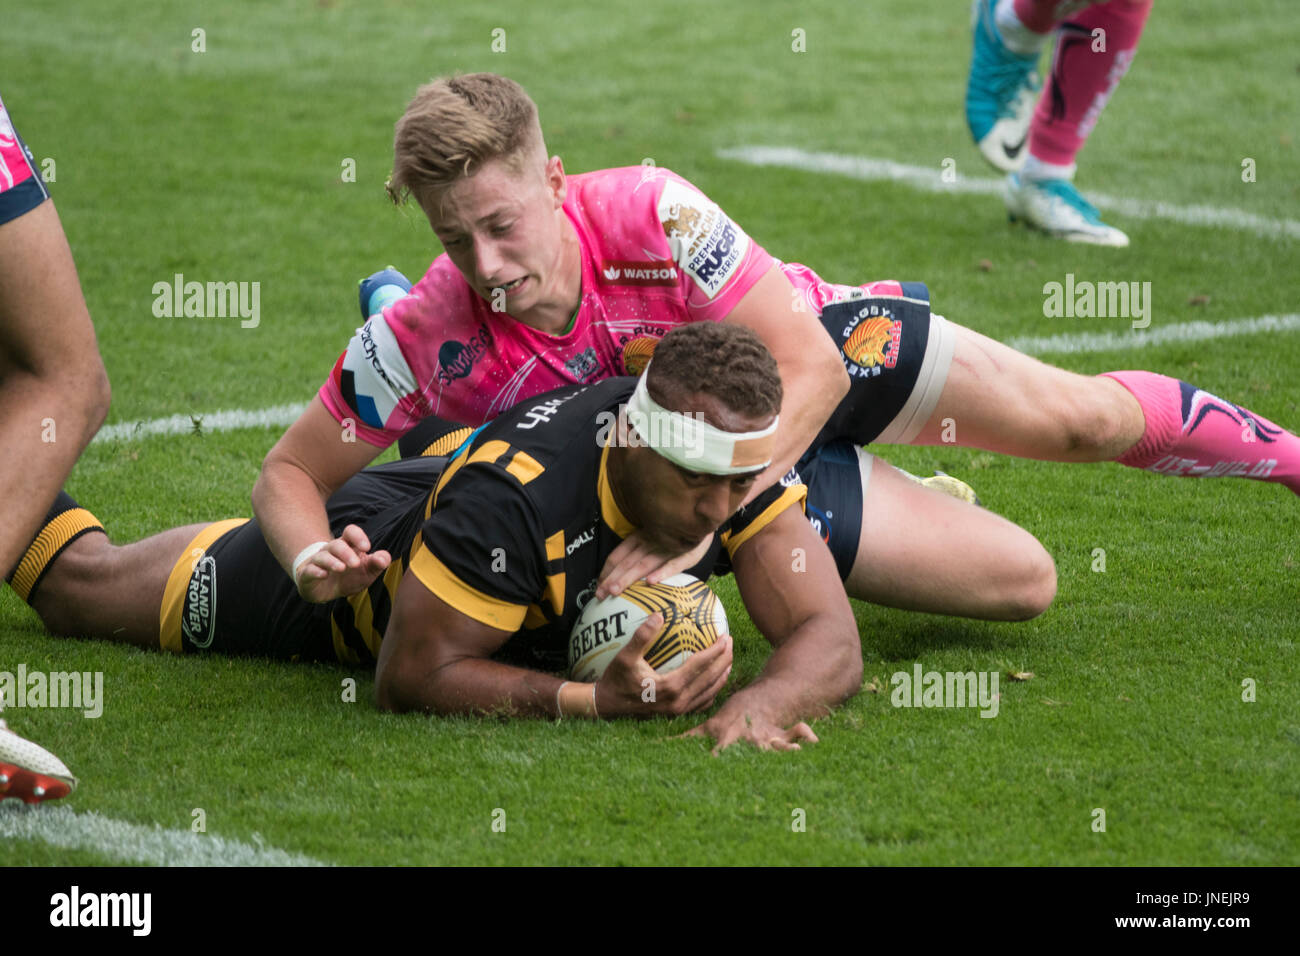 Northampton, UK. 29th July, 2017. The  Wasps  and  The Exeter Chiefs   at  the Rugby 7 S Premiership Series at  Northampton Franklins Garden Credit: PATRICK ANTHONISZ/Alamy Live News Stock Photo